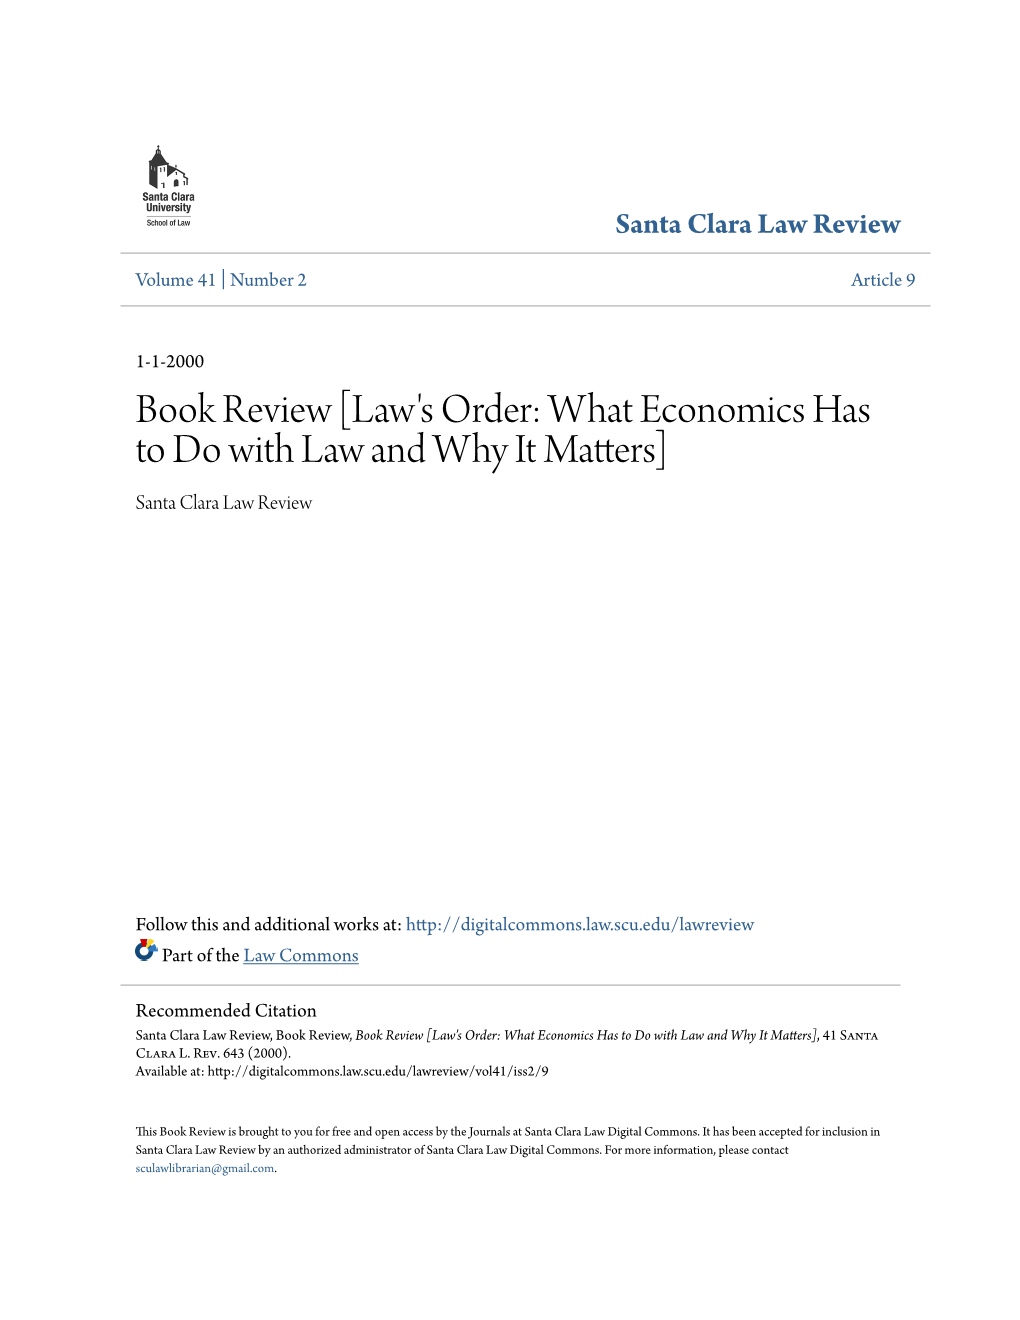 Book Review [Law's Order: What Economics Has to Do with Law and Why It Matters] Santa Clara Law Review